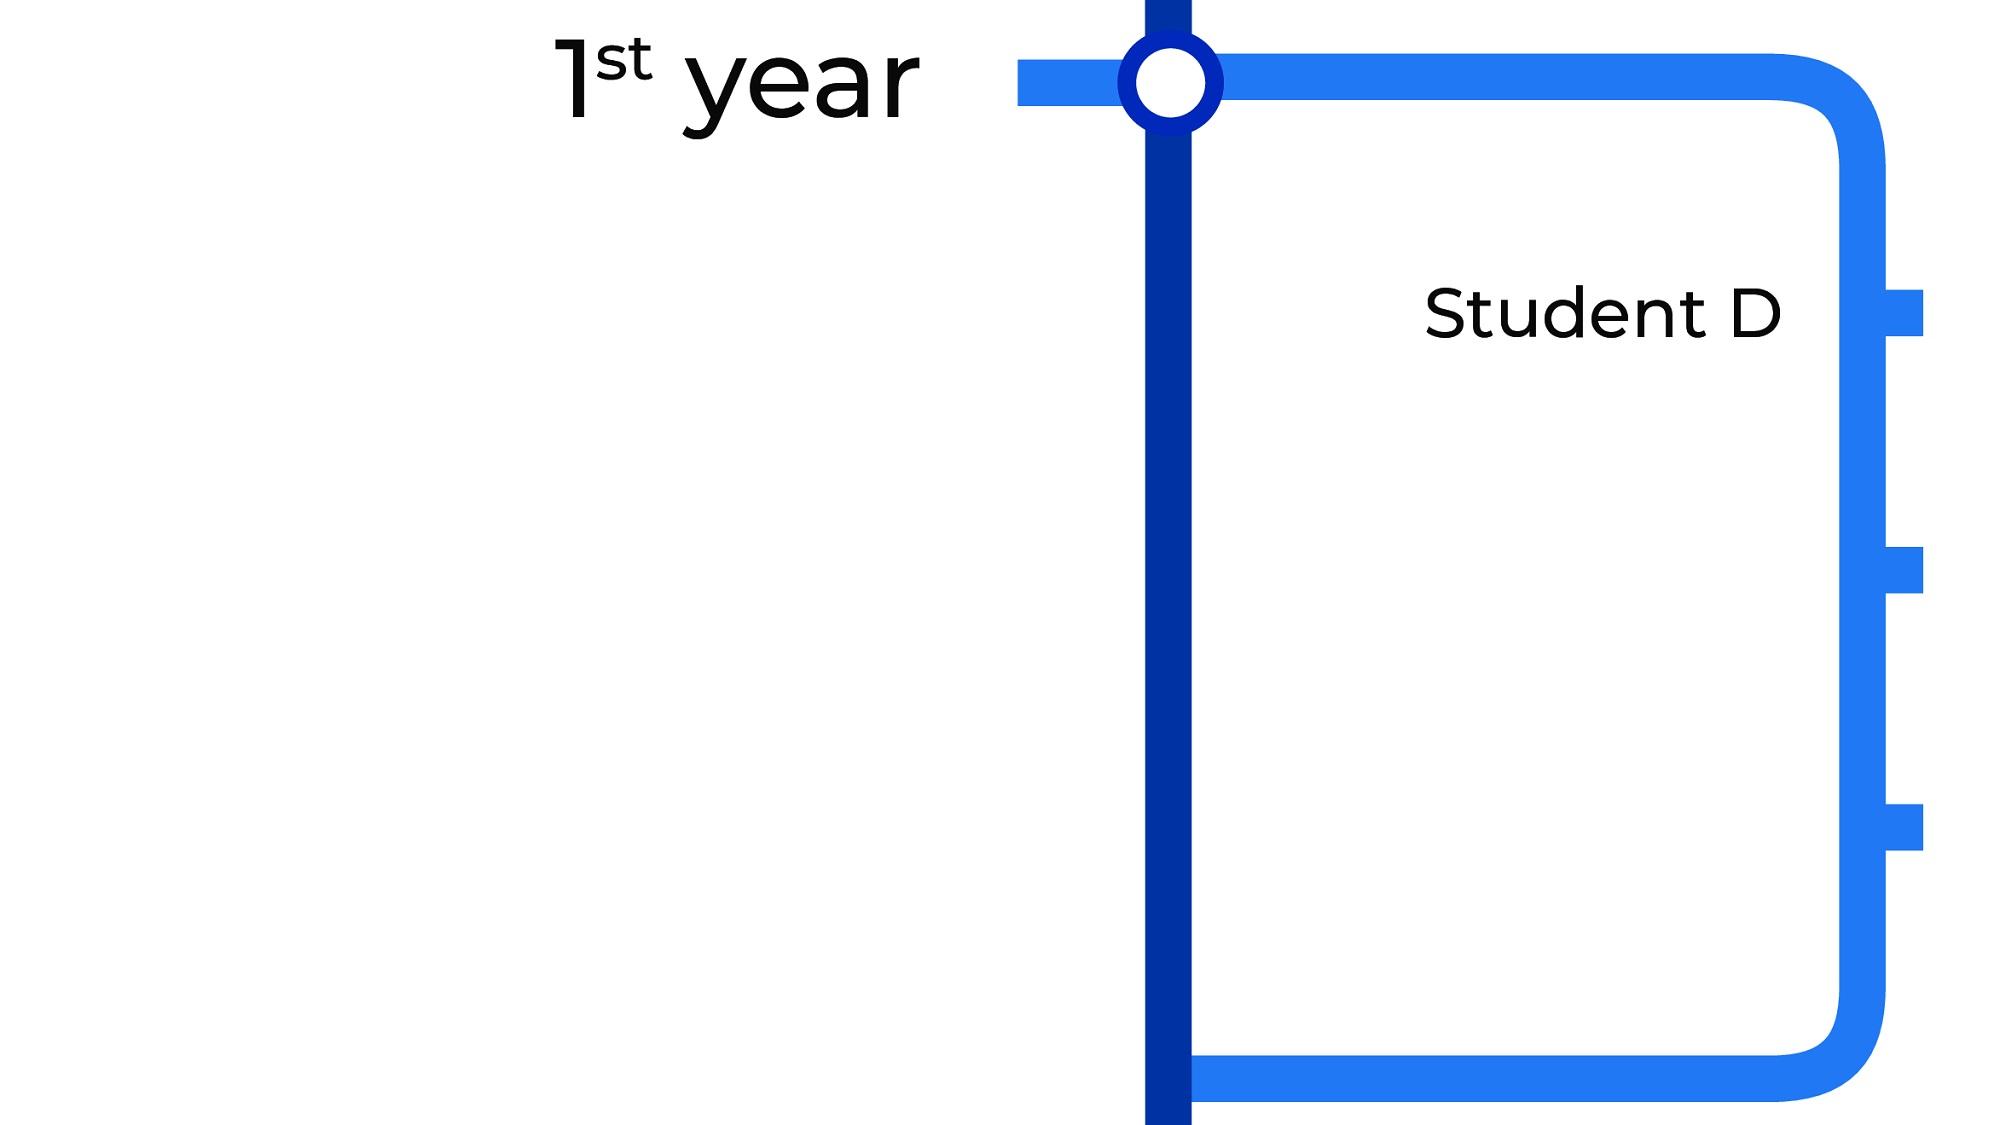 Beck map for first year TBF student progress